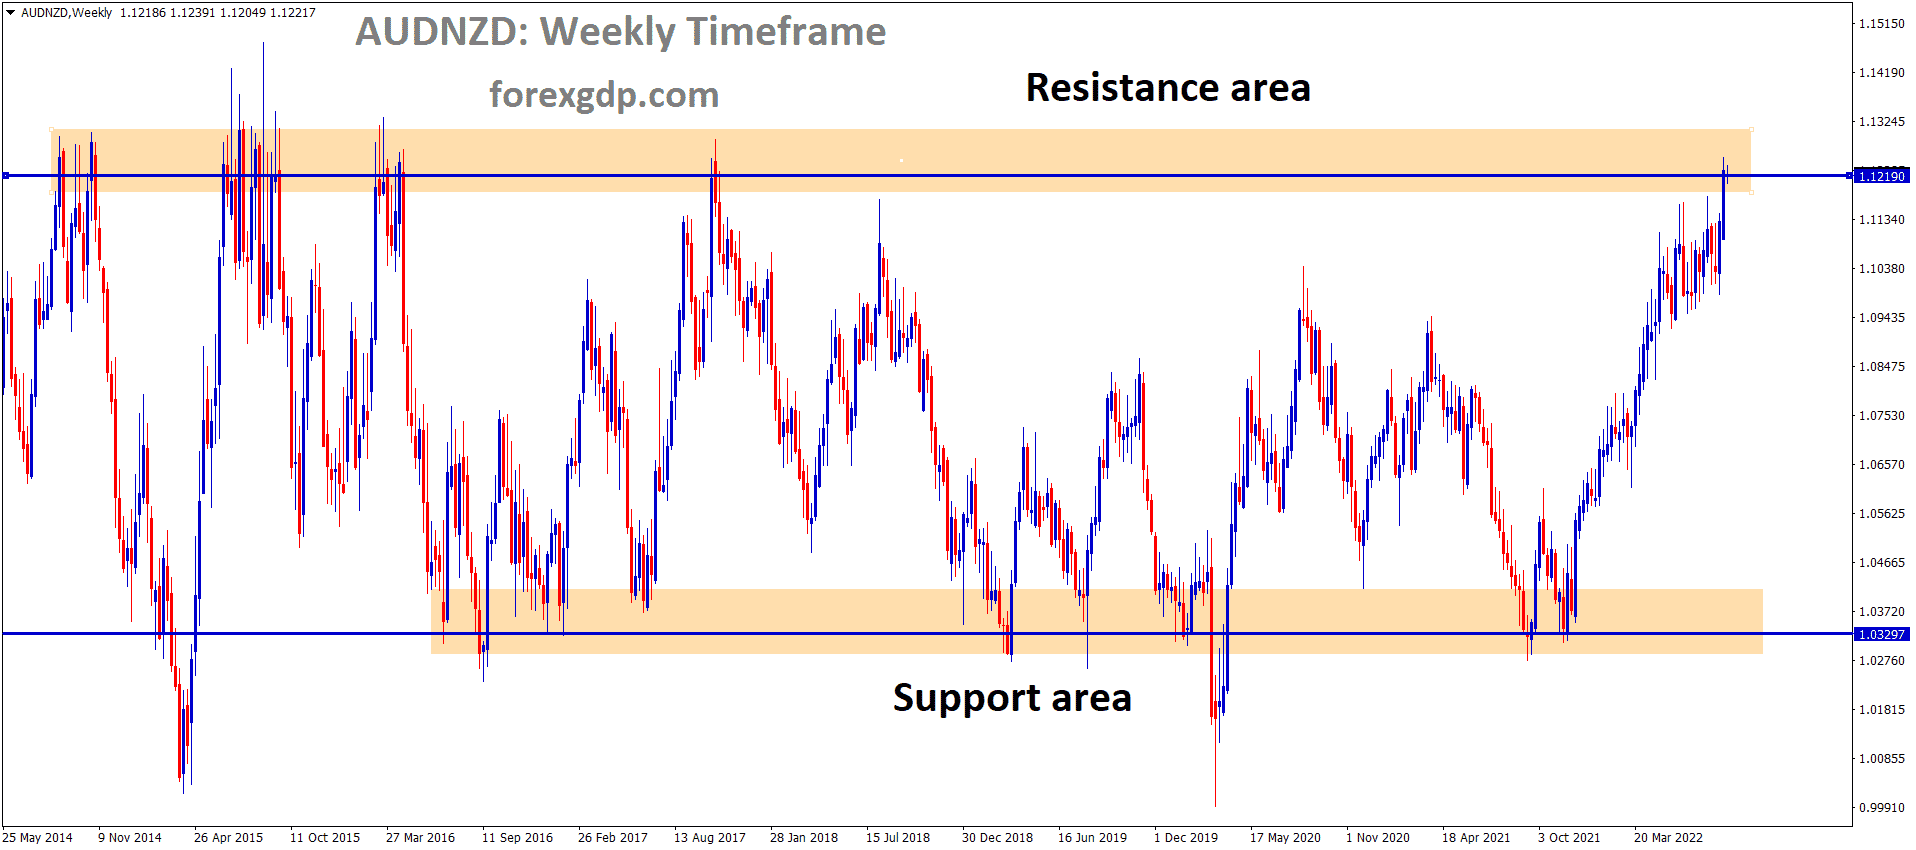 AUDNZD is moving in the Box Pattern and the Market has reached the horizontal resistance area of the pattern